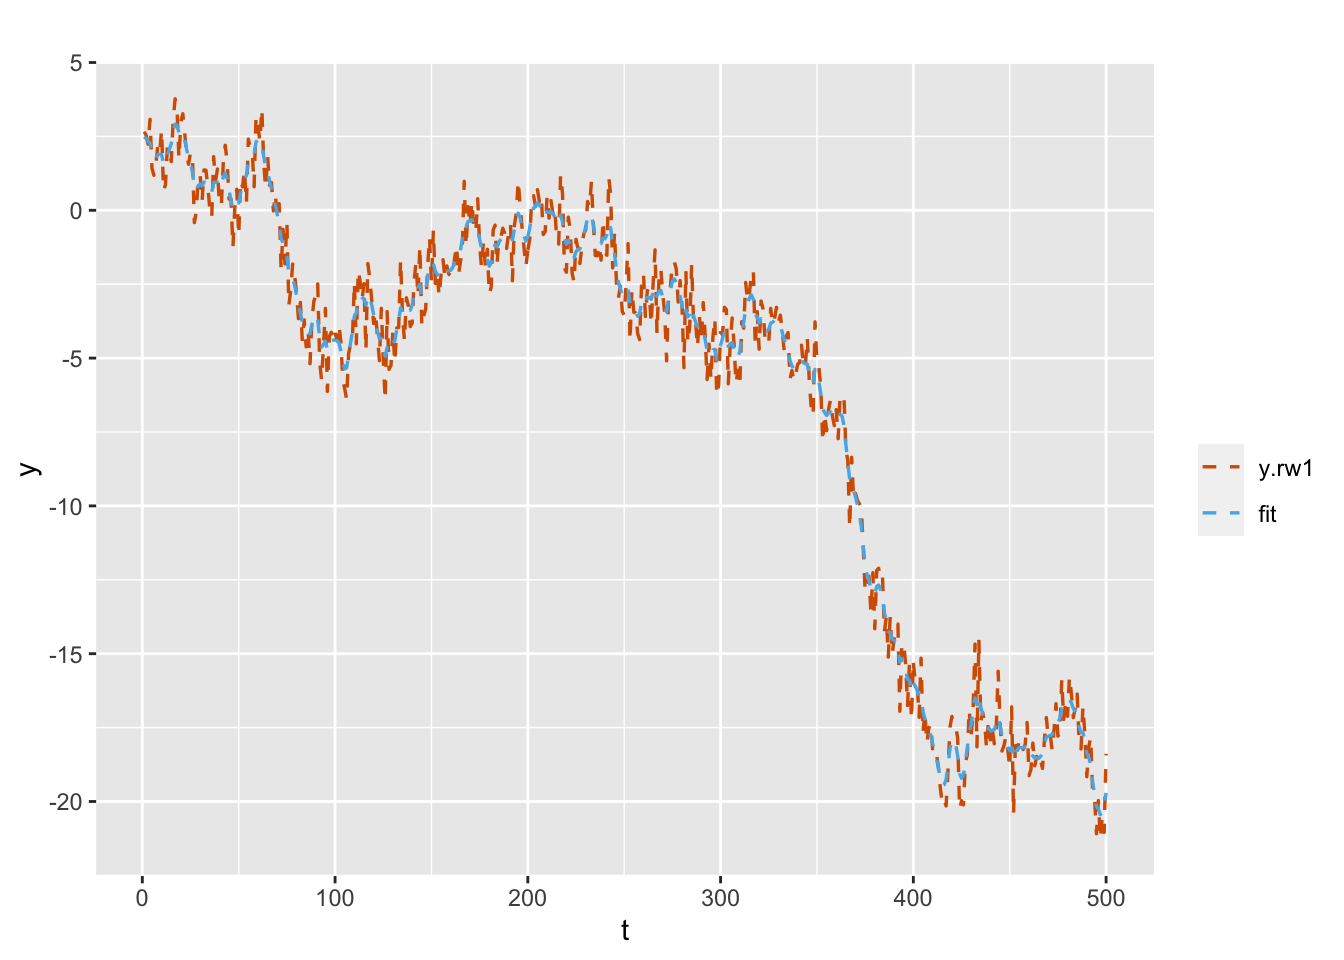 Simulated and fitted responses under the random walk plus noise model.